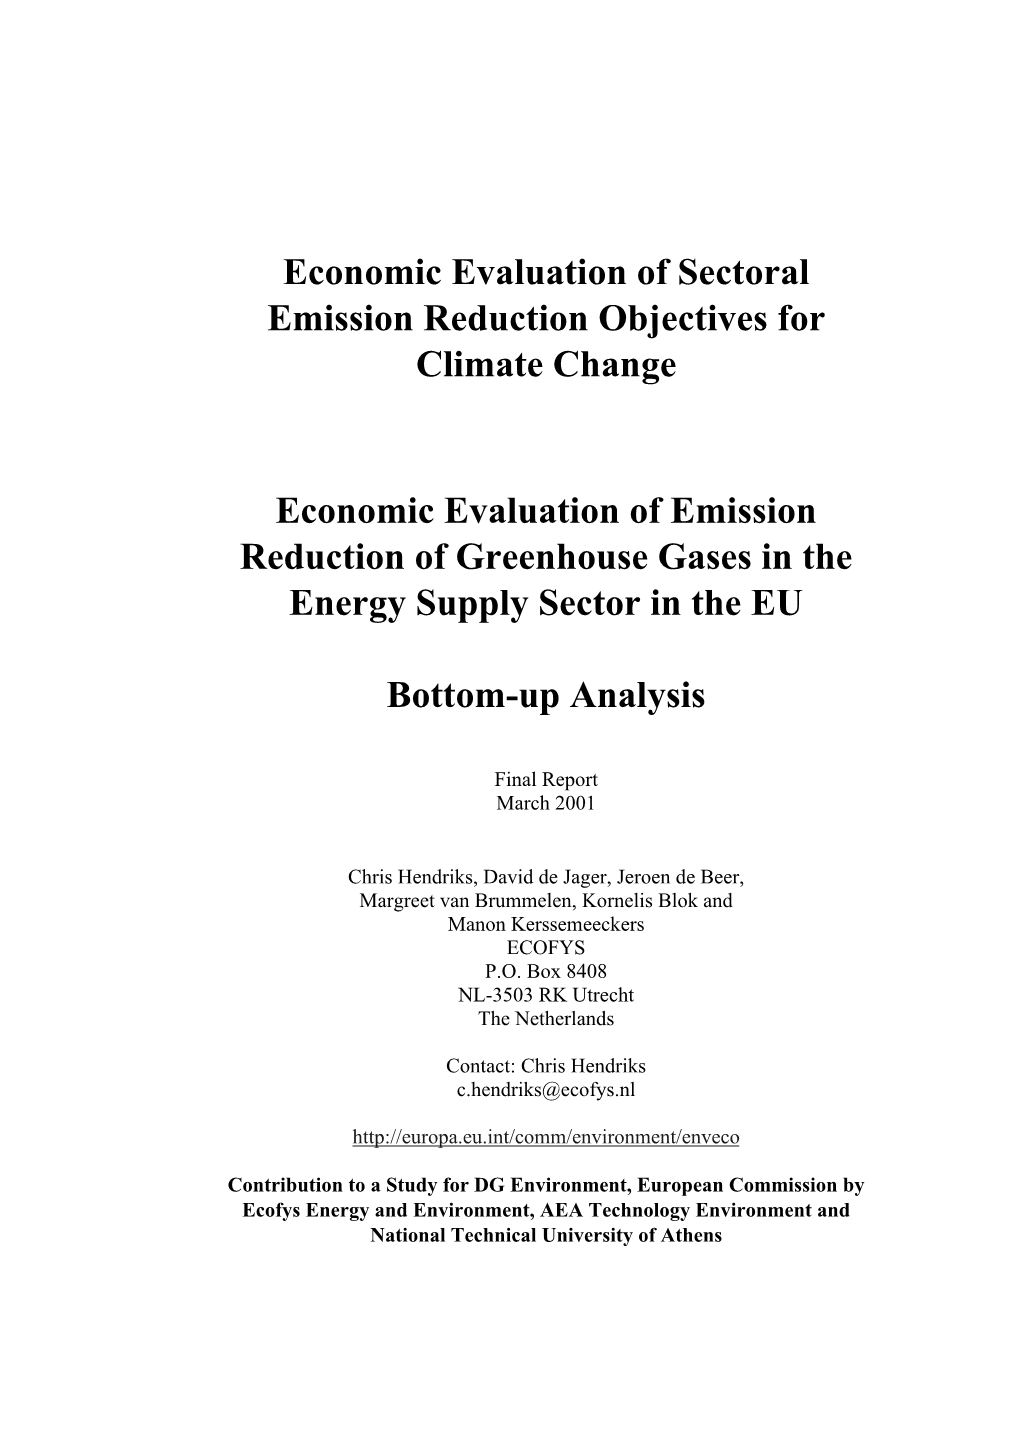 Economic Evaluation of Emission Reduction of Greenhouse Gases in the Energy Supply Sector in the EU